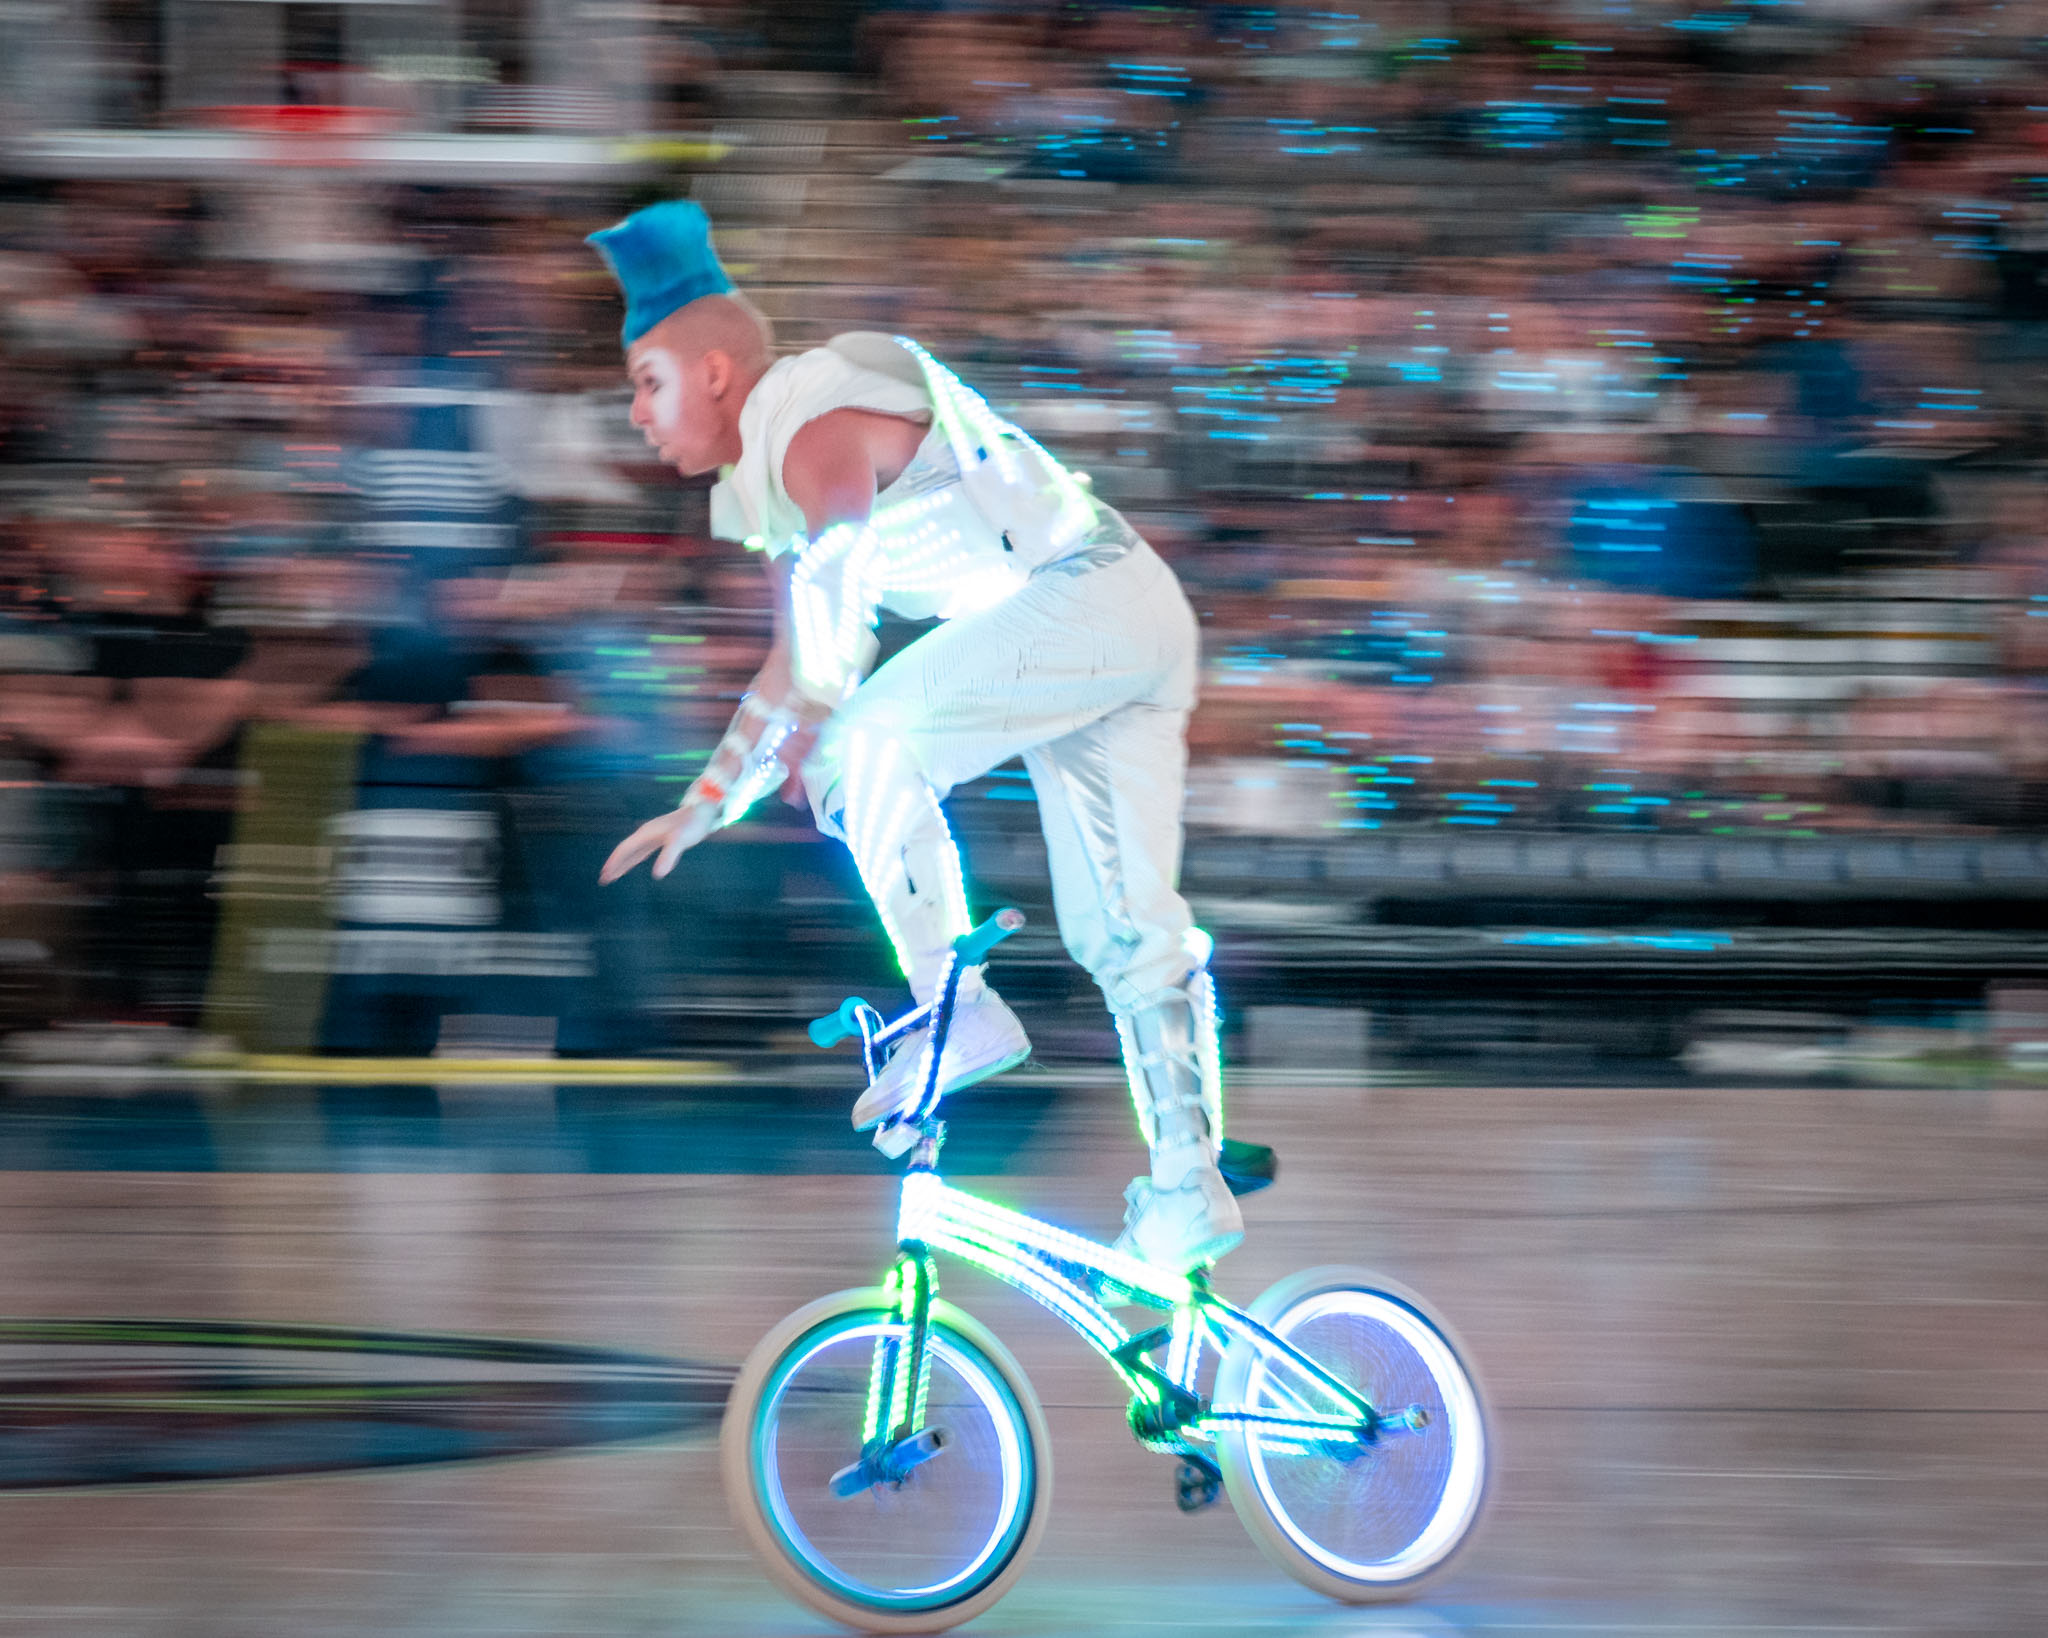 a man on a bicycle with lights on